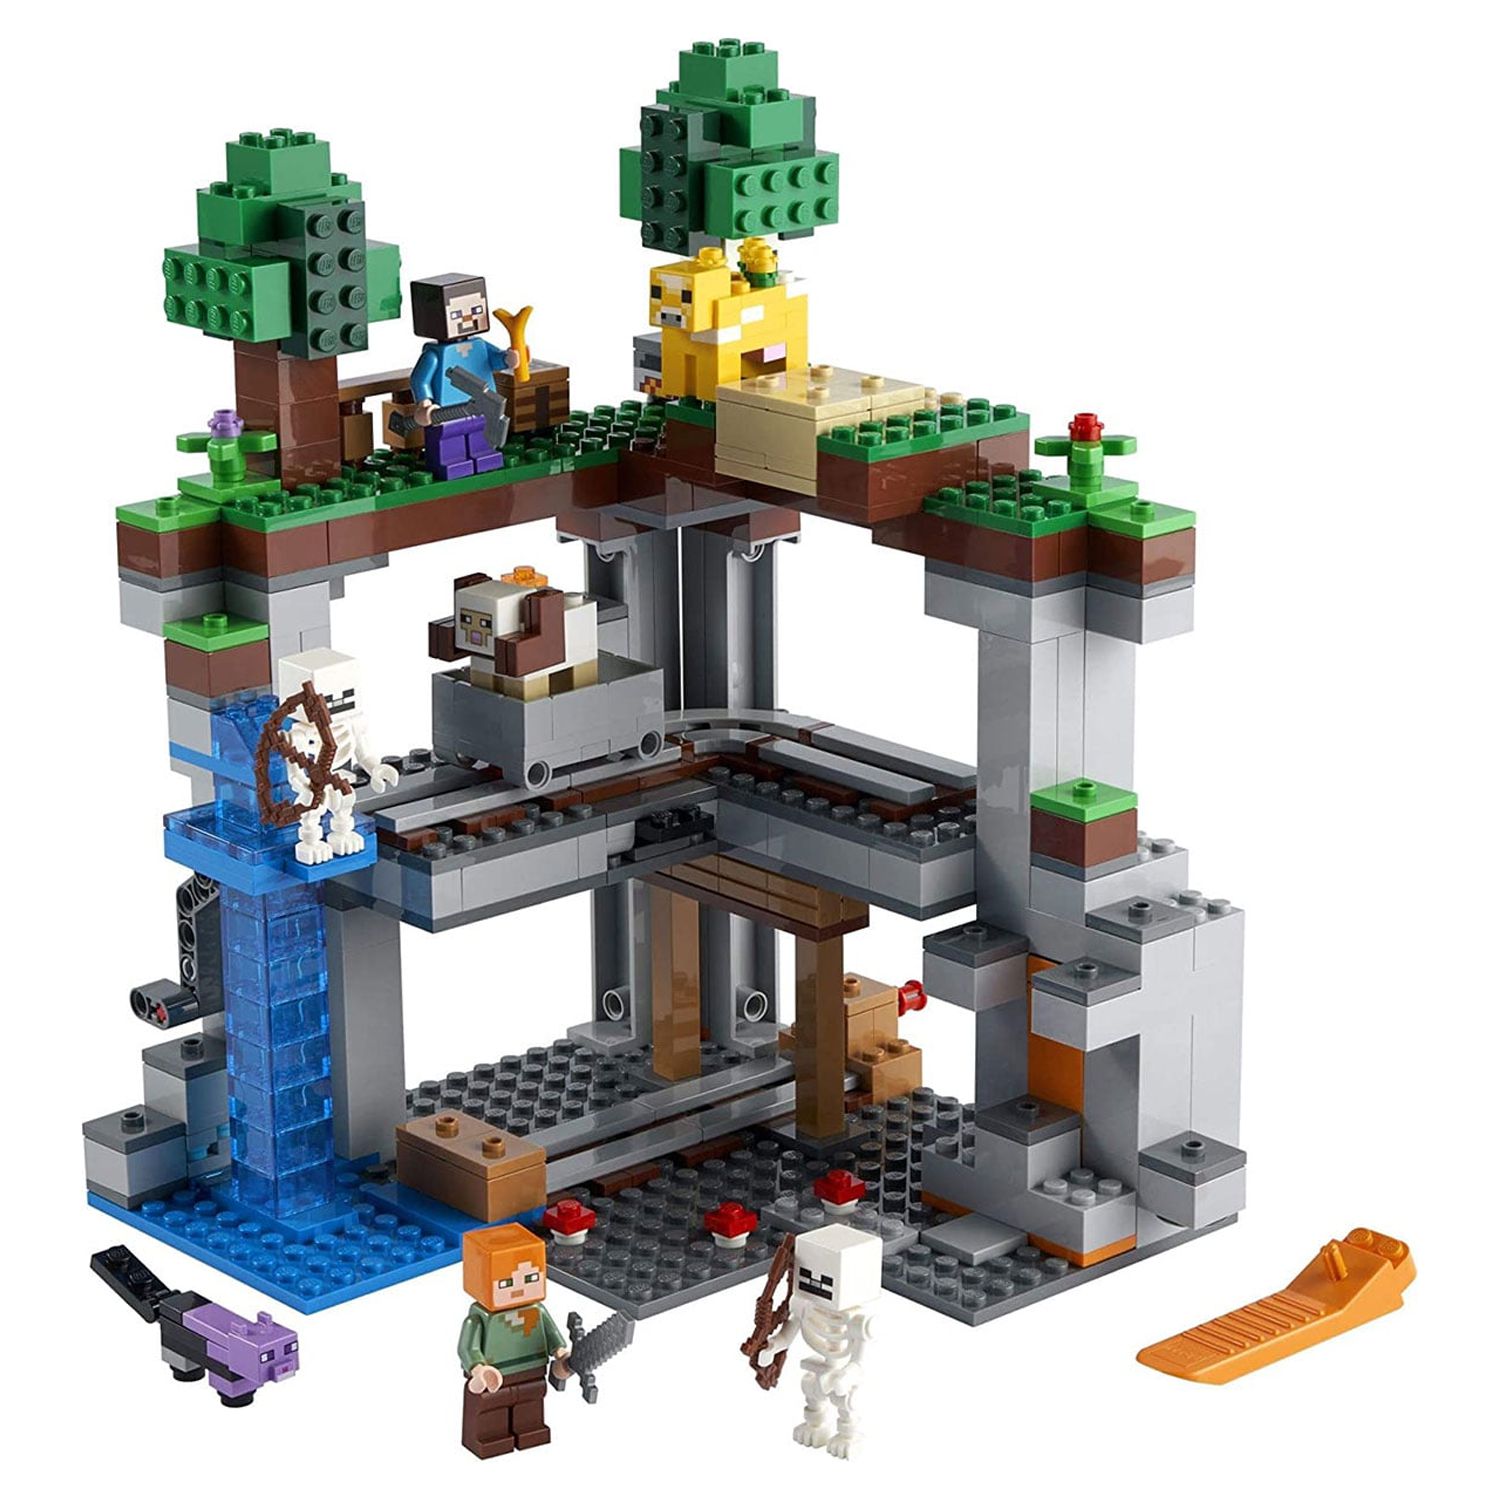 LEGO The First Adventure 21169 Building Set (542 Pieces) - image 1 of 7